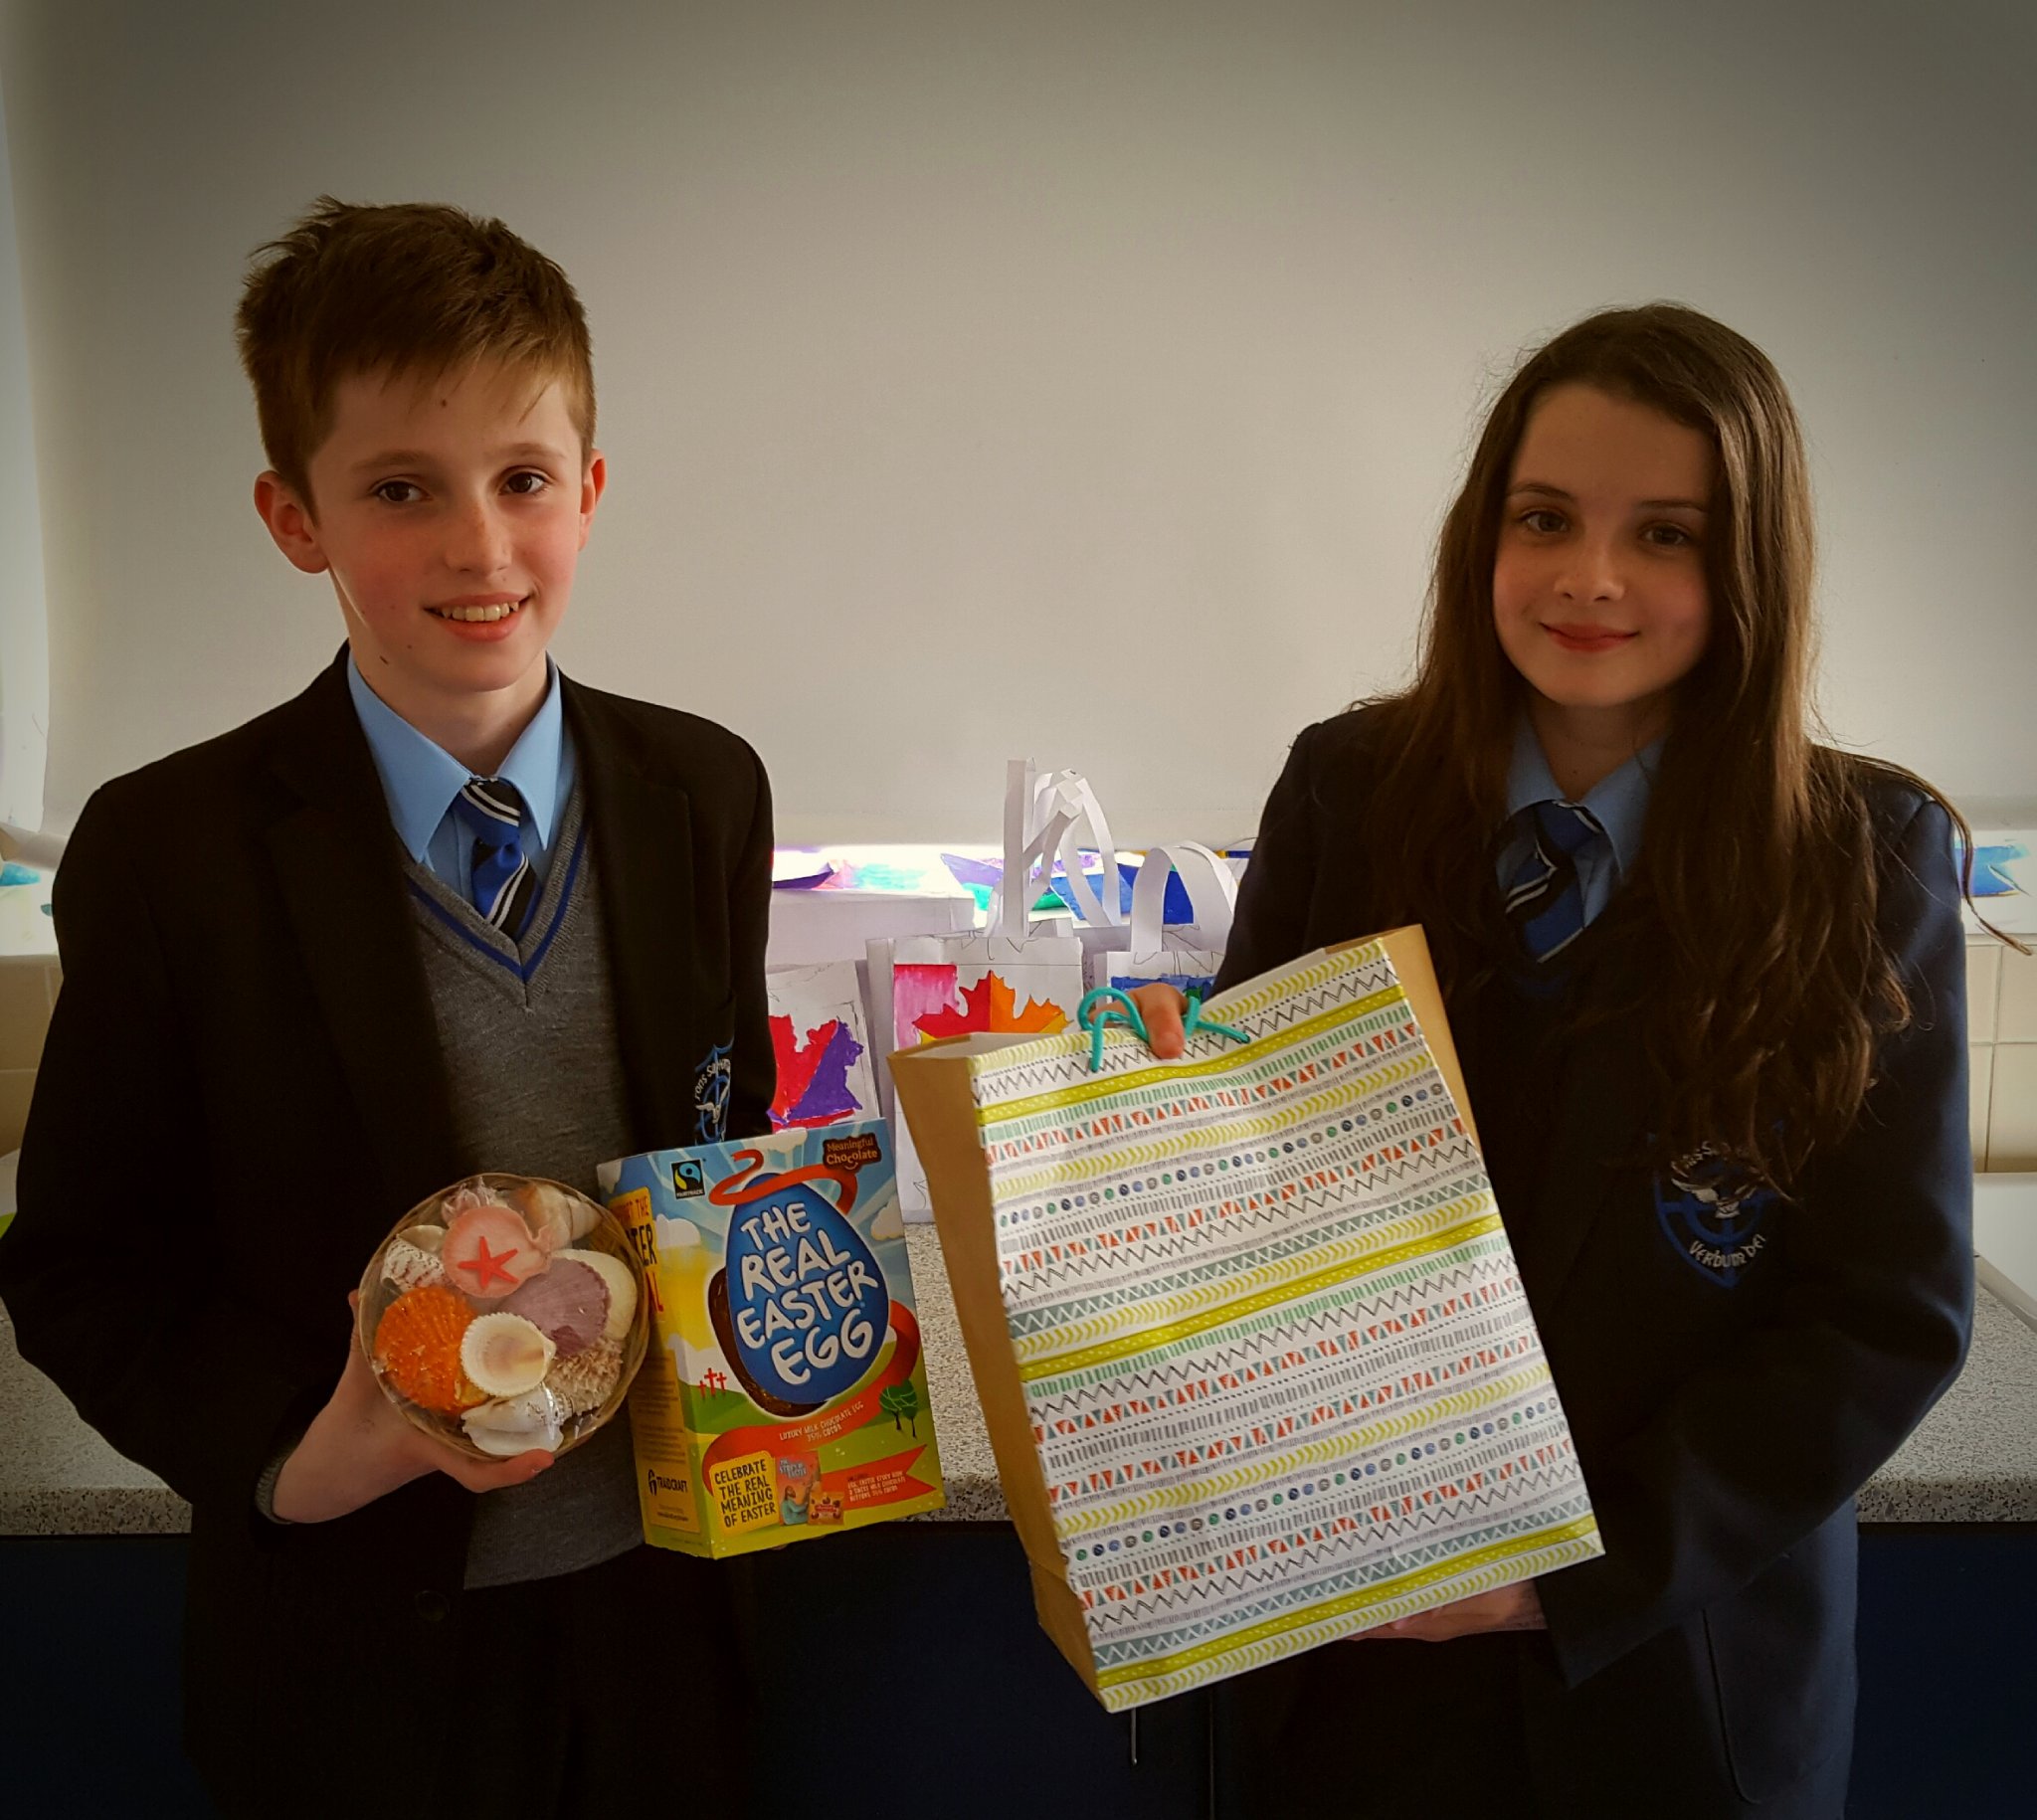 Art and Design Department SPC on X: #Congratulations to both winning  pupils @SPC_ArtDesign from Year 8Hg who won the KS3 #HealthyEating #Poster  #Competition run at #Easter Enjoy the prizes! Richly deserved for